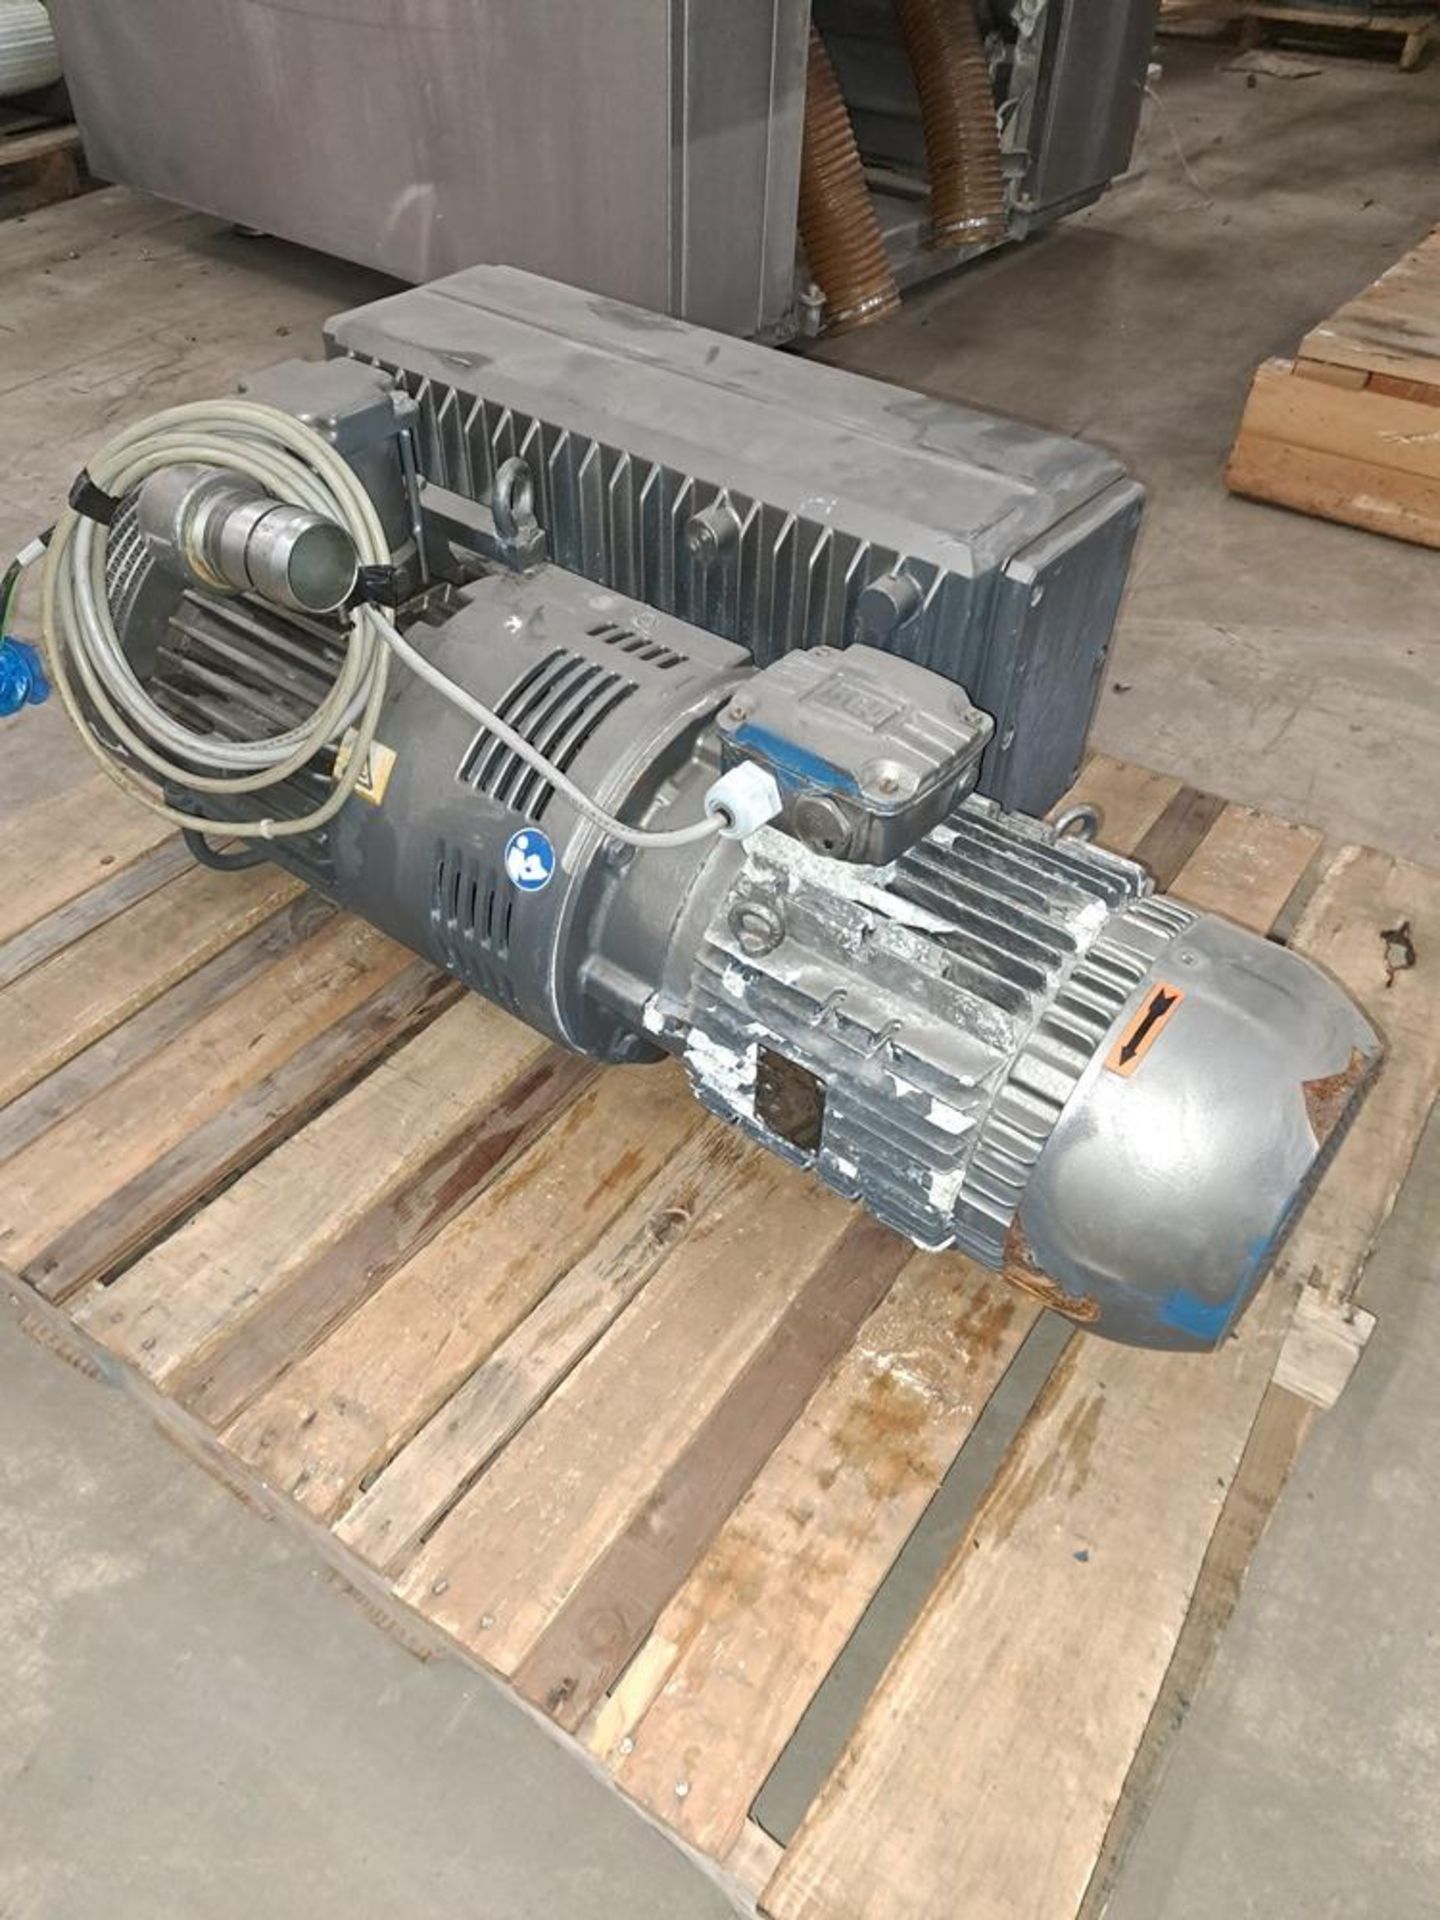 Busch Mdl. RA0250D5H3 Vacuum Pump, 7.5 KW, 3 phase, 60 hz motor, Ser. #C172700021B (Located in - Image 2 of 4